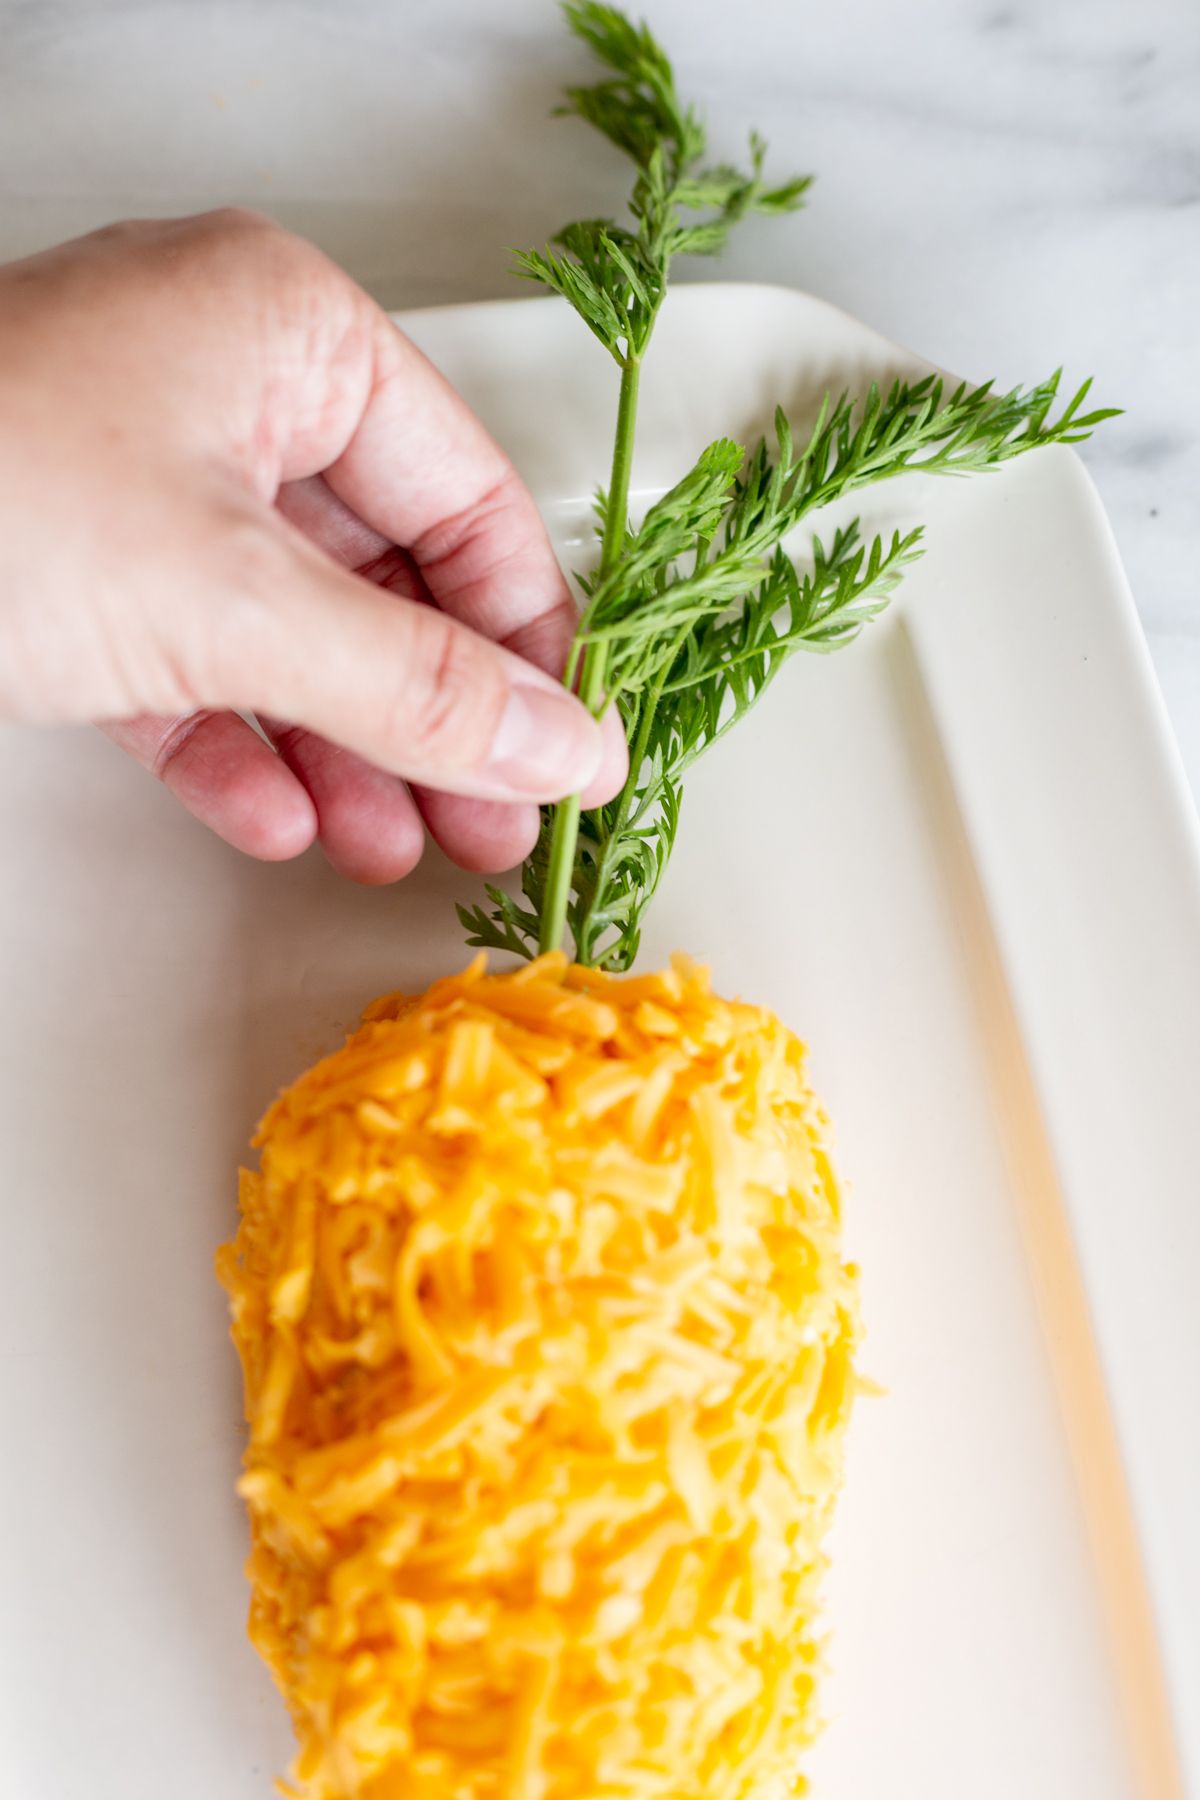 A carrot cheese ball on a white platter. A hand is placing the green stem of parsley.